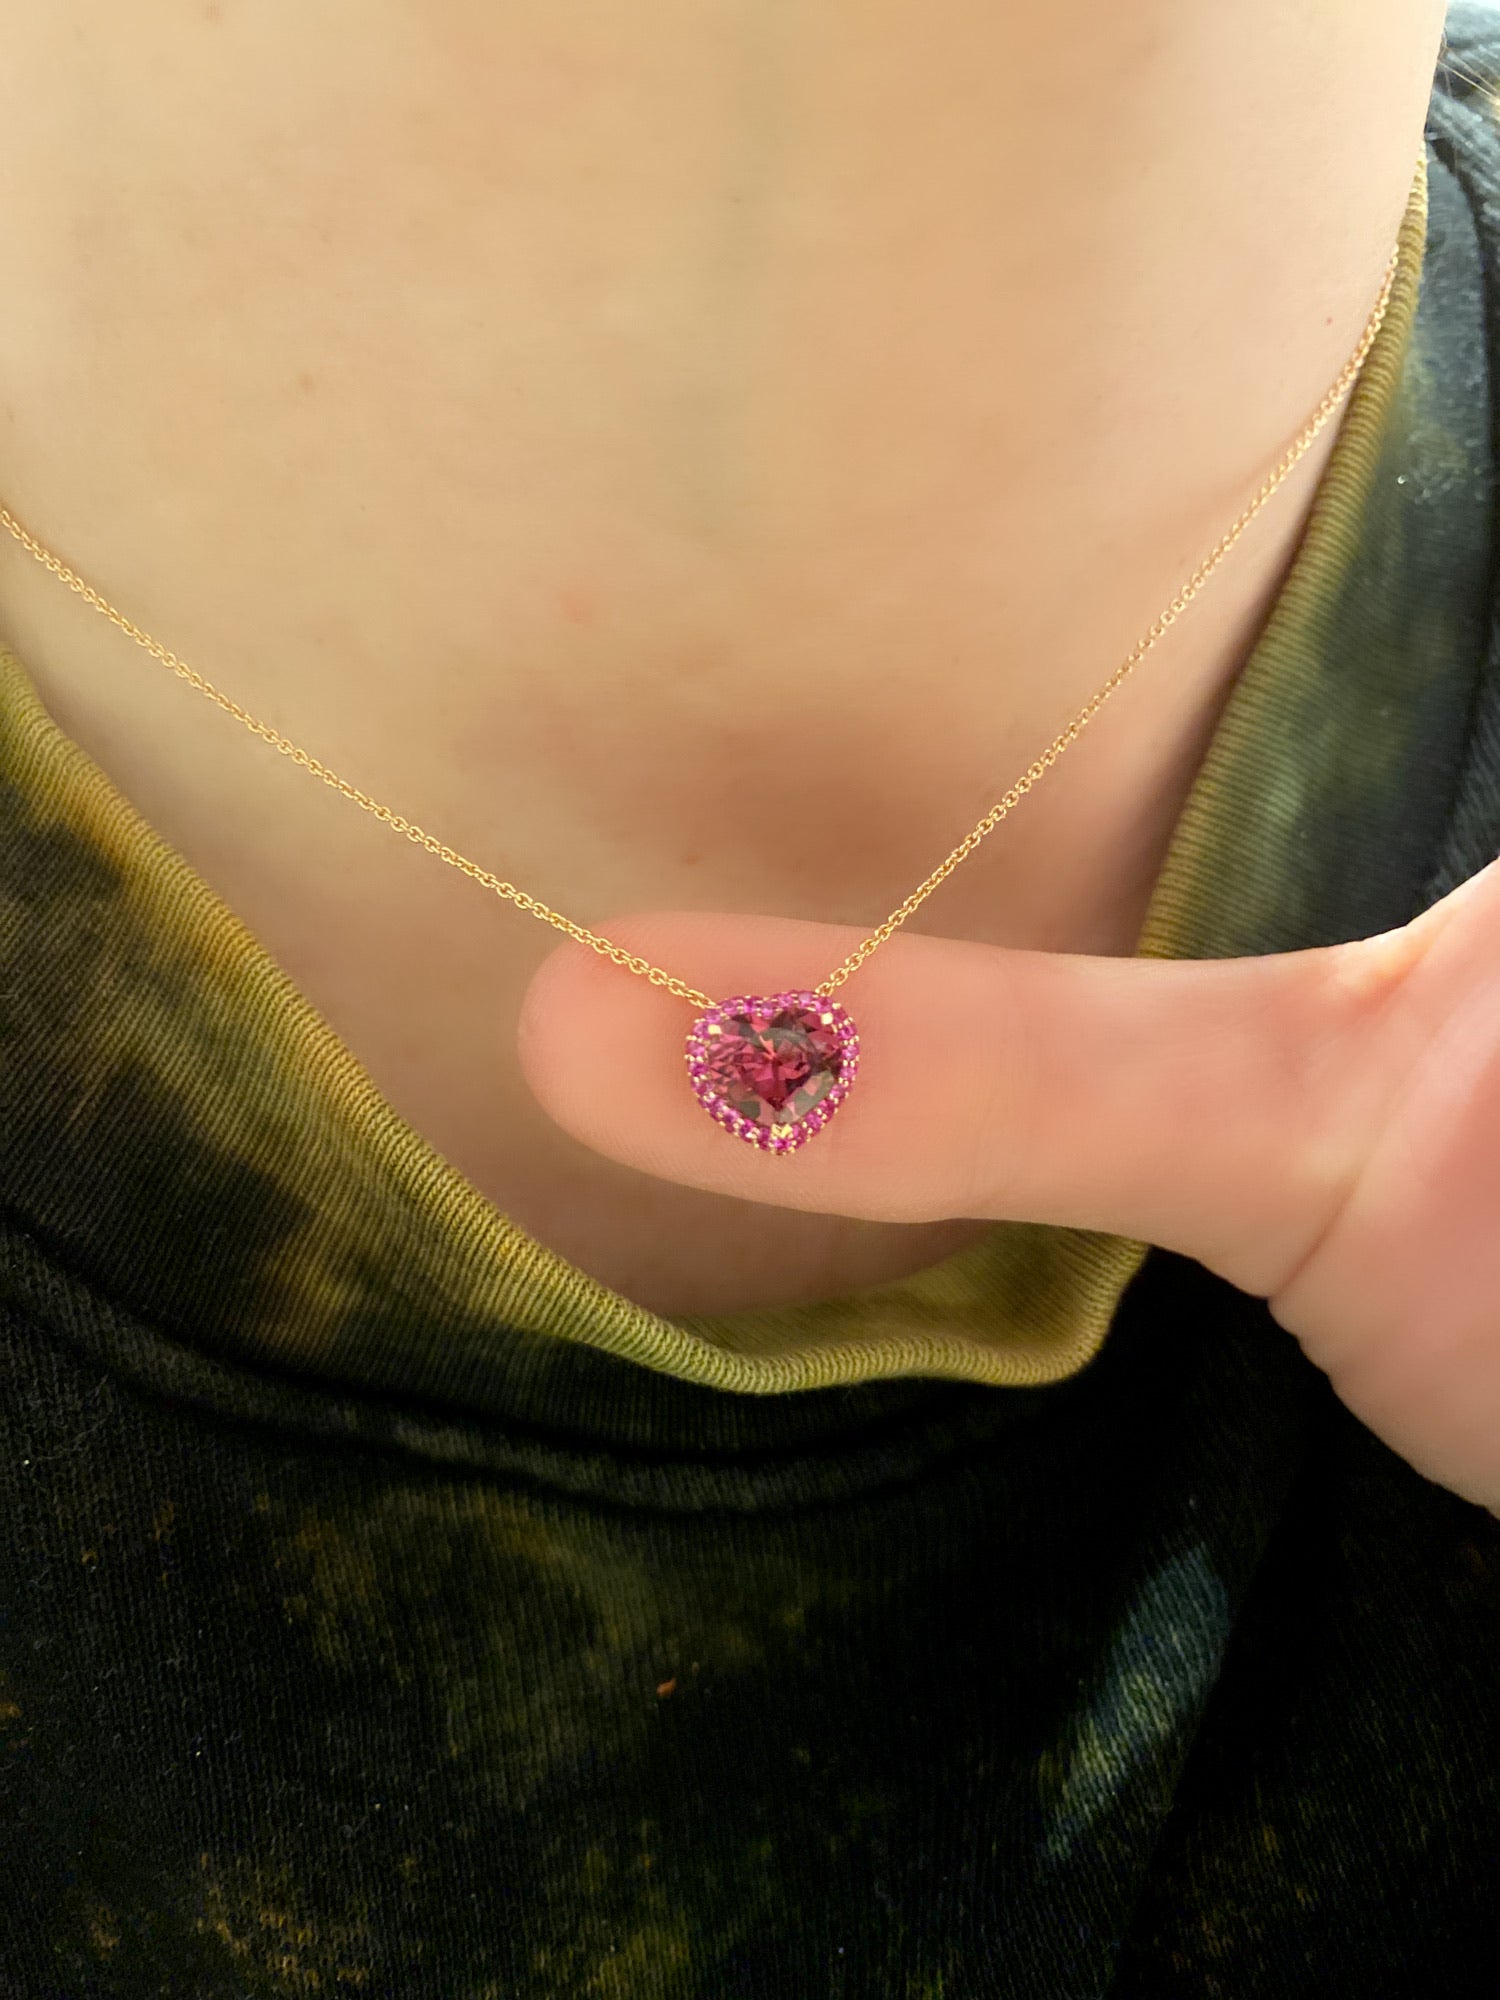 Pink Sapphire Puffy Heart Pendant Necklace - Nuha Jewelers